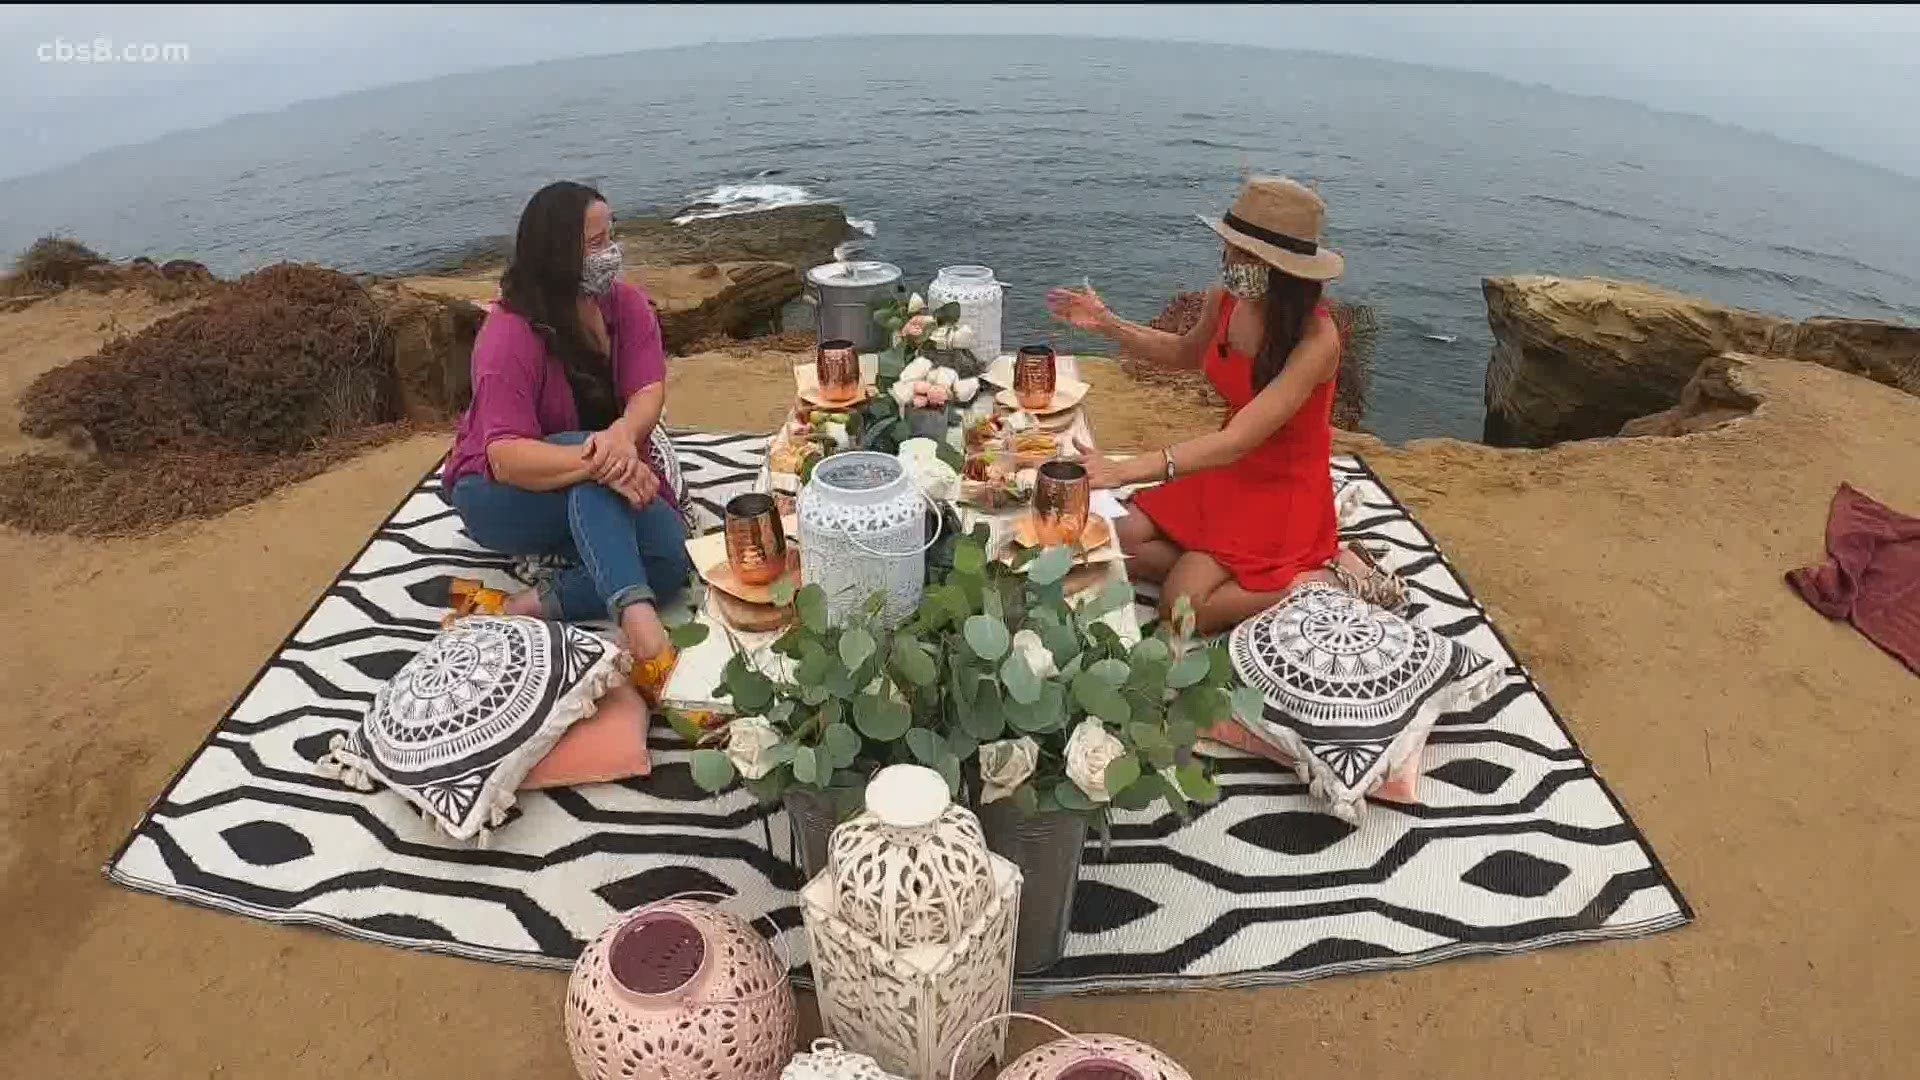 Out & Rent yourself a luxury pop-up picnic | cbs8.com